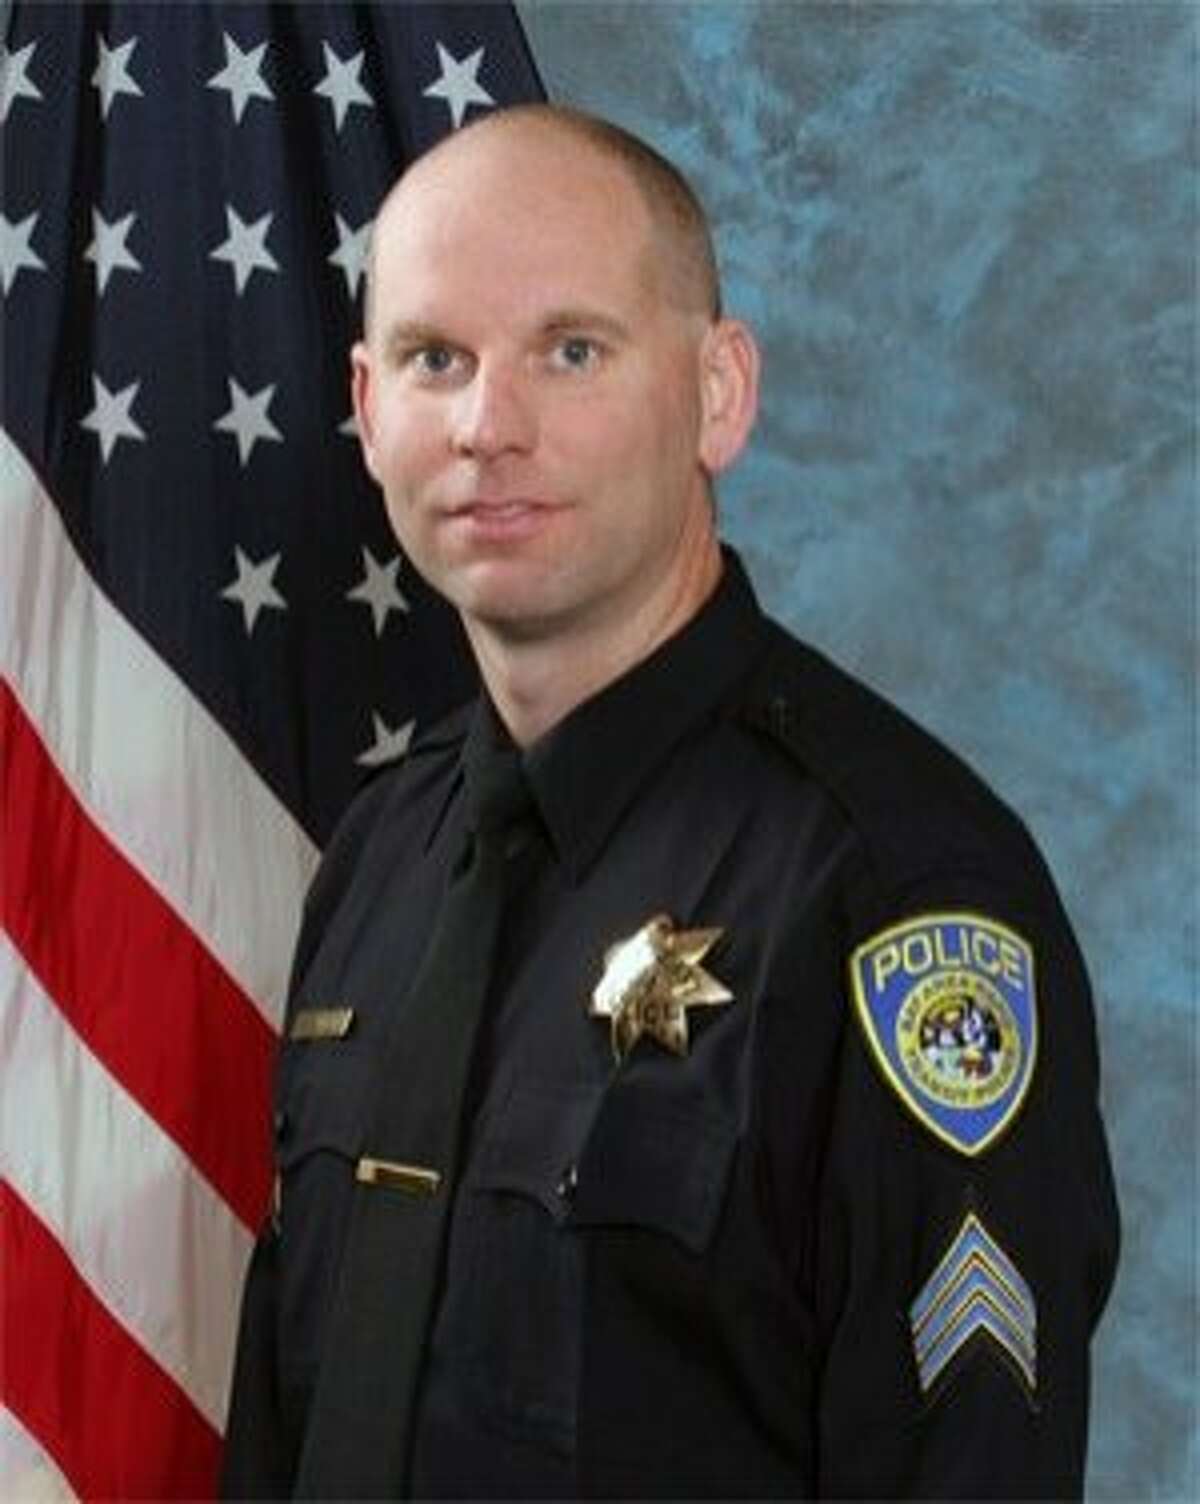 Veteran BART police officer Tom "Tommy" Smith was shot and killed by another BART officer on Tuesday Jan. 21, 2014 in Dublin, Calif.